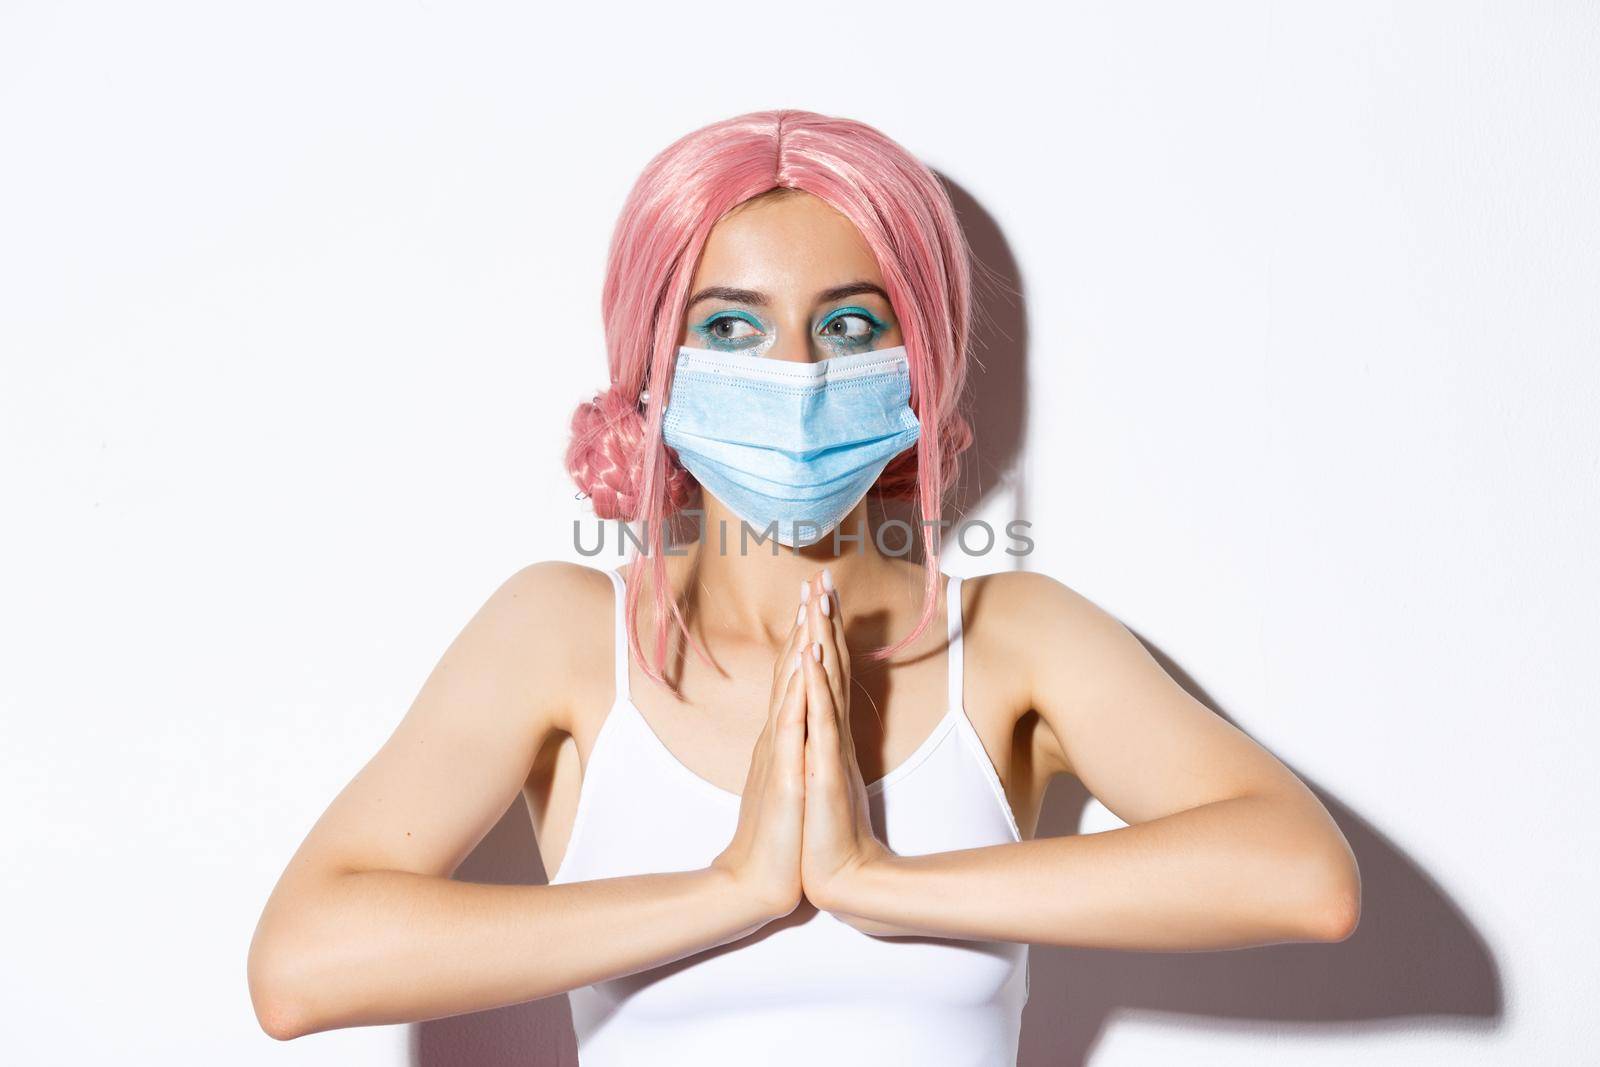 Covid-19, social distancing and people concept. Close-up of cute party girl in pink wig and medical mask, holding hands together and looking left, begging for help.